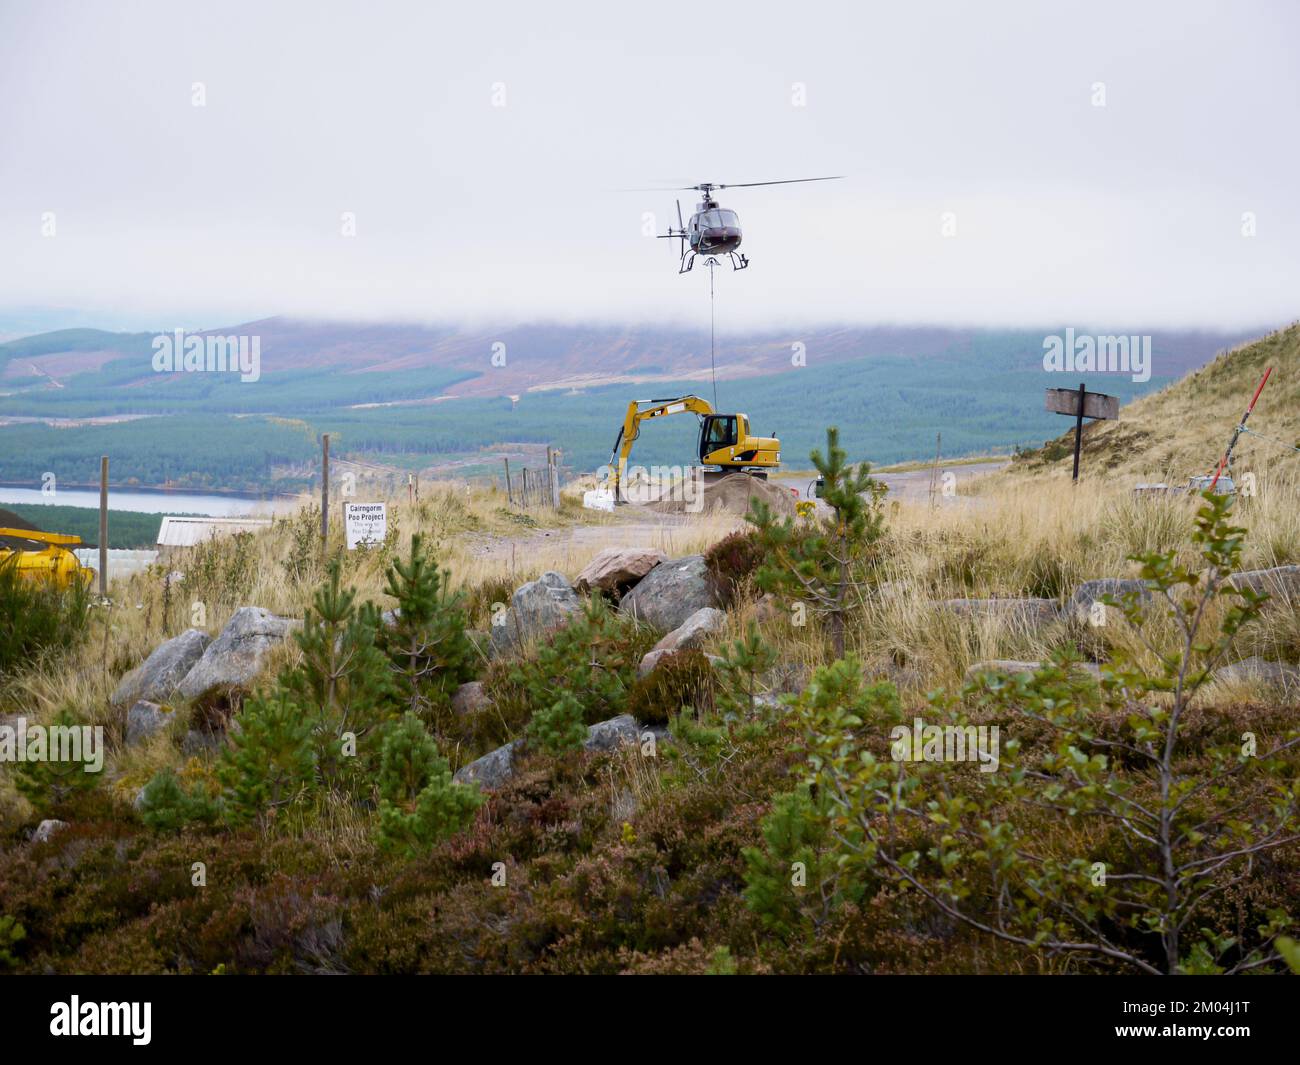 Aviemore, Scotland UK. Taken on 14 October 2009. Helicopter lifts bags of stone in the air. Man attaching rope to tonne bags of stone. Stock Photo